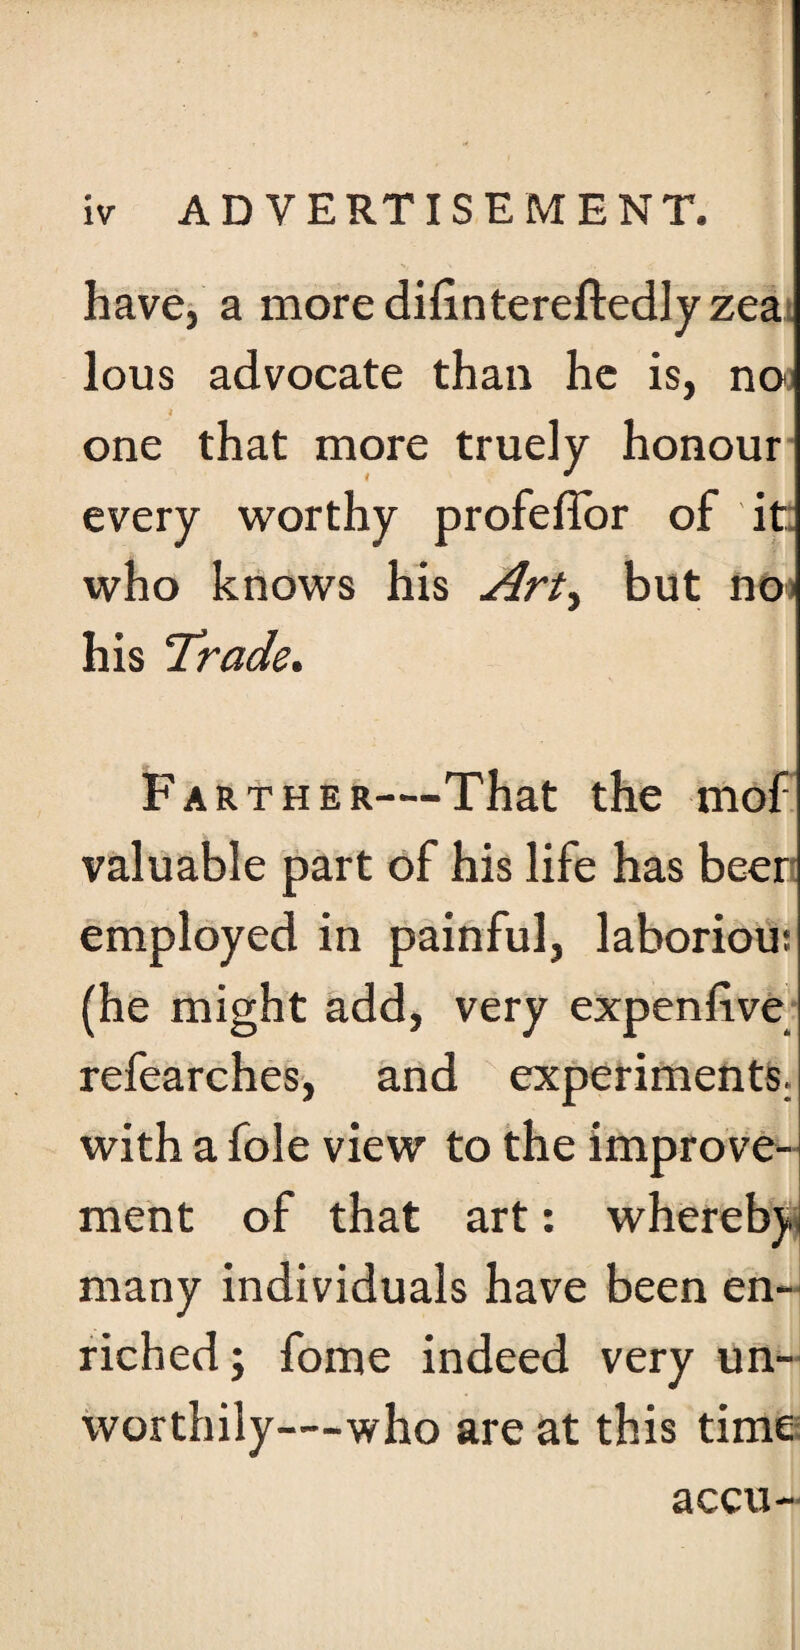 have, a moredifintereftedlyzea lous advocate than he is, noi i ‘ one that more truely honour every worthy profefTor of it who knows his Art, but no his Trade. Farther—That the mof valuable part of his life has beer employed in painful, laborious (he might add, very expenlive refearches, and experiments, with a foie view to the improve¬ ment of that art: wherebj. many individuals have been en¬ riched ; fome indeed very un¬ worthily—who are at this time accu